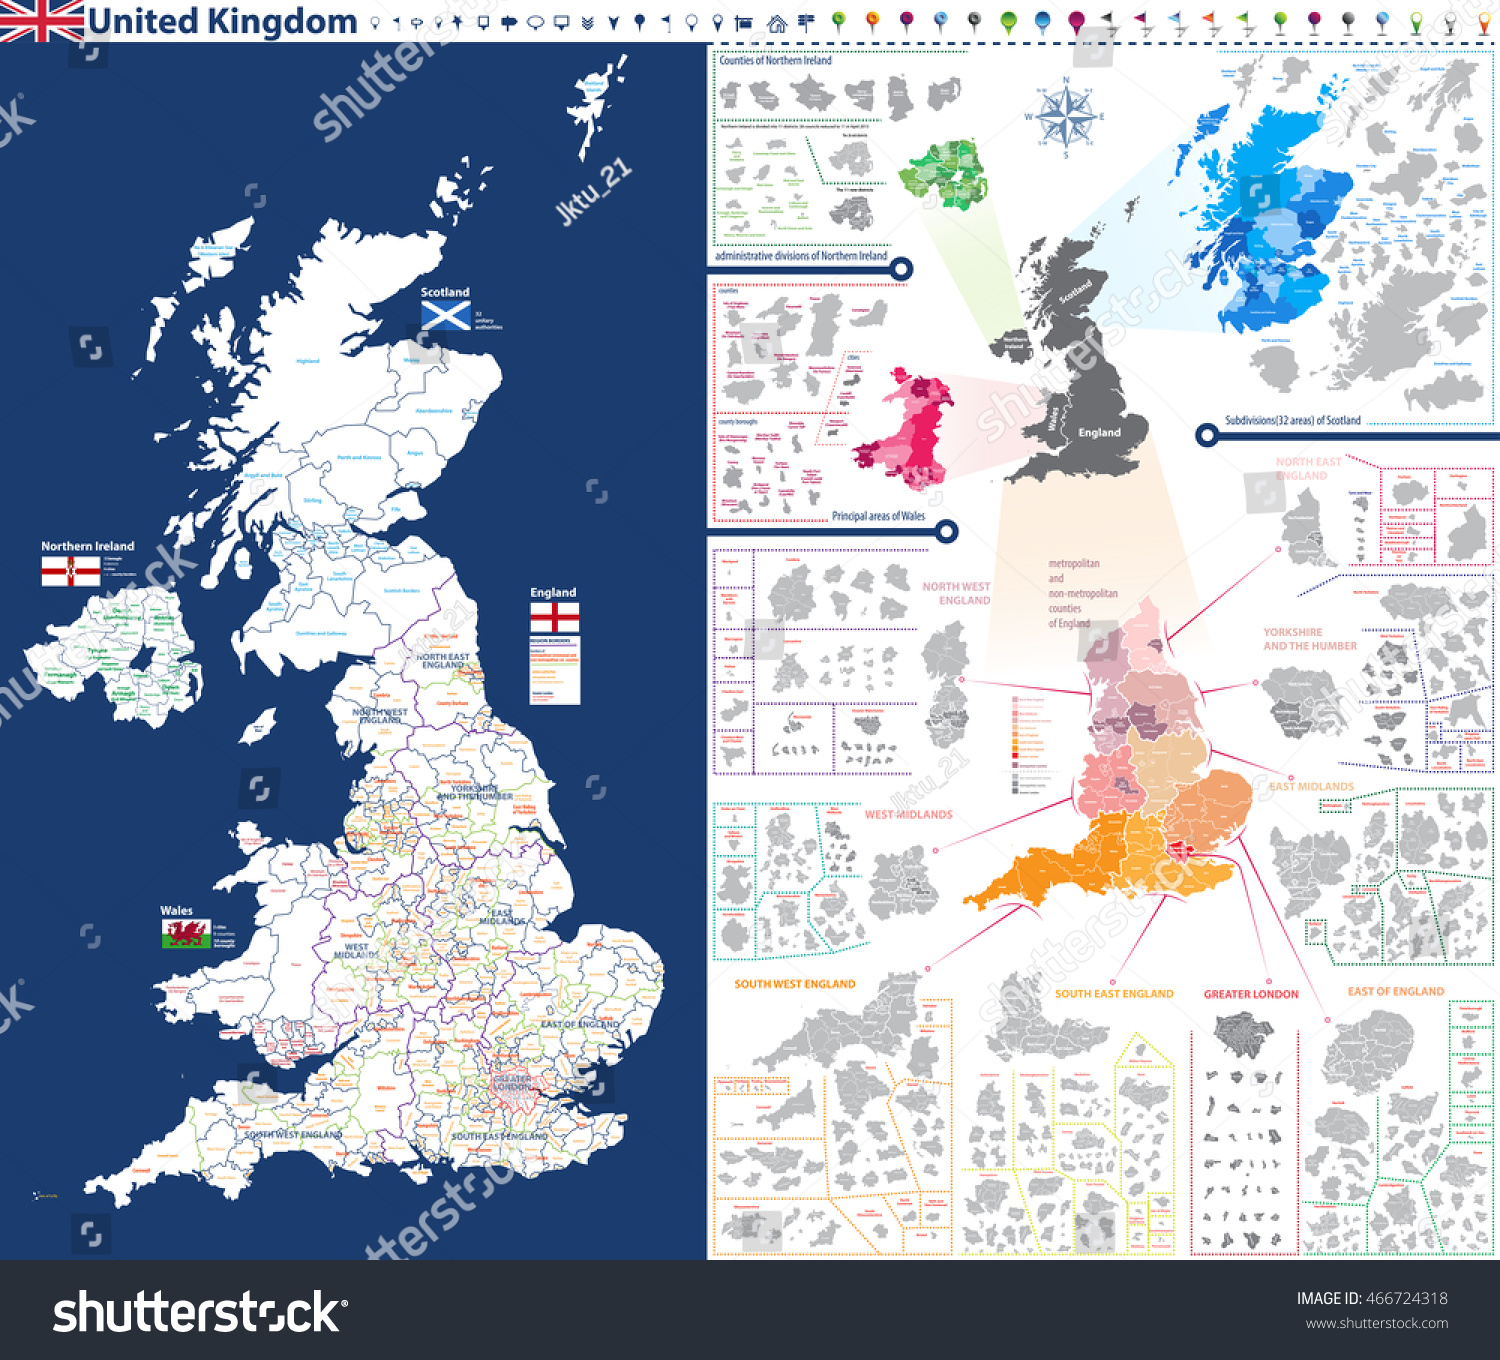 SVG of administrative units map of United Kingdom with administrative divisions(counties,areas,districts,etc.)and flags of England, Wales, Scotland and Northern Irelnad. All elements entitled and easy-to-use svg